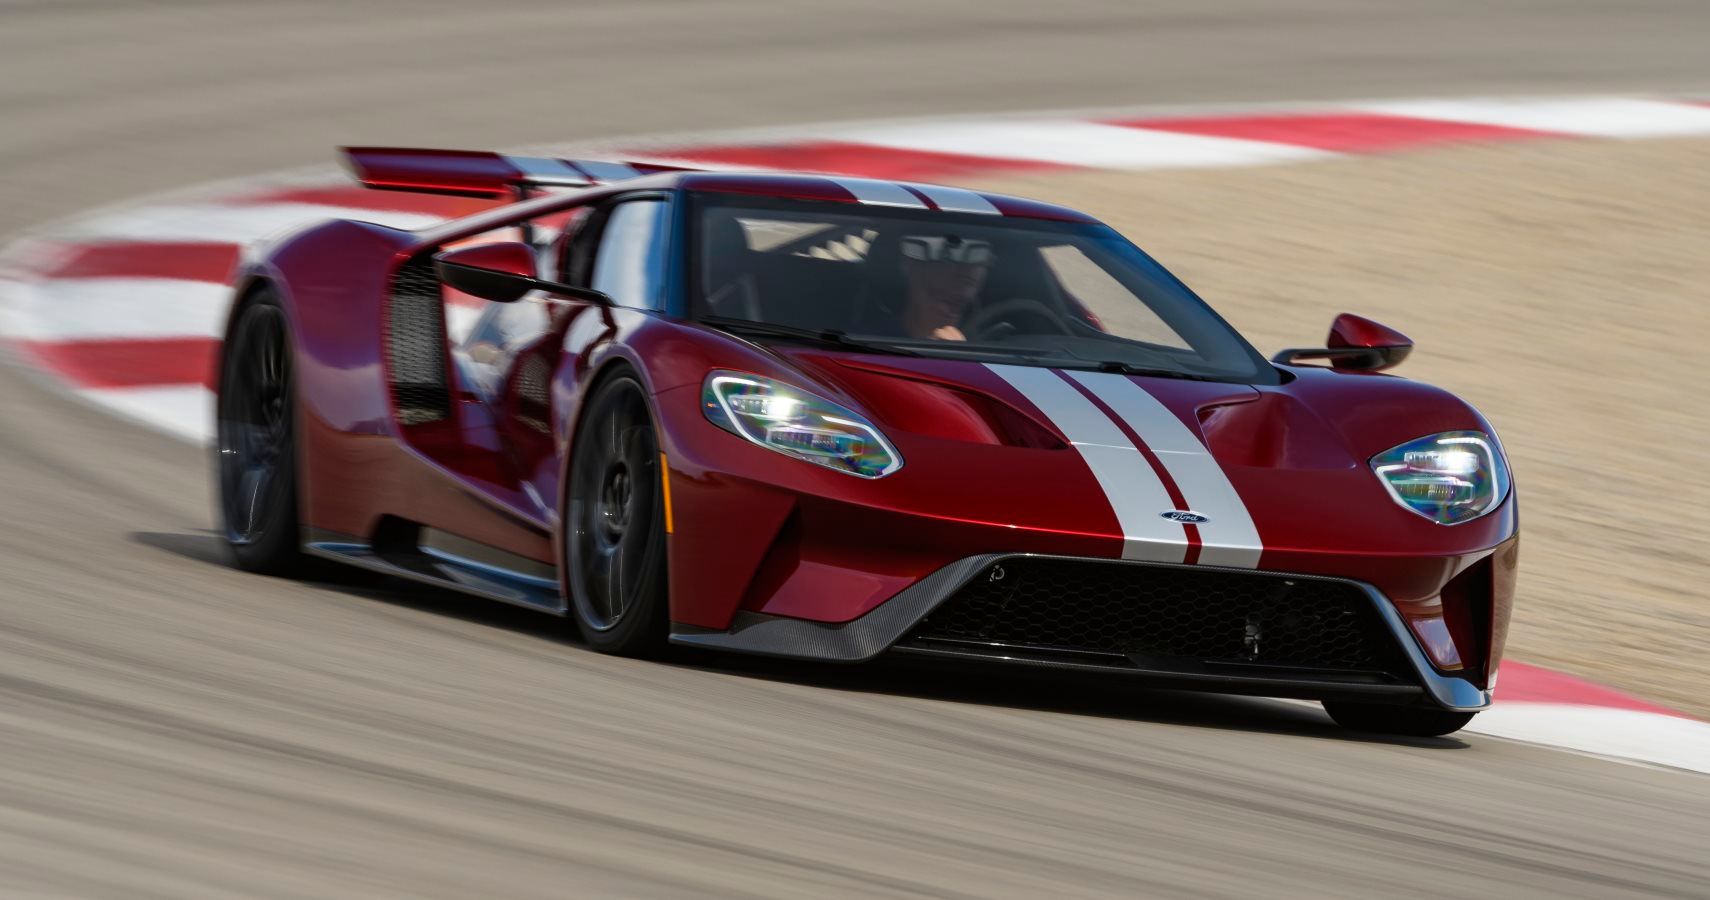 In creating the all-new high-performance Ford GT, the pioneers behind the supercar designed it not only to win races but also to serve as a test bed for new technologies and ideas for future vehicles across Ford’s vehicle lineup.